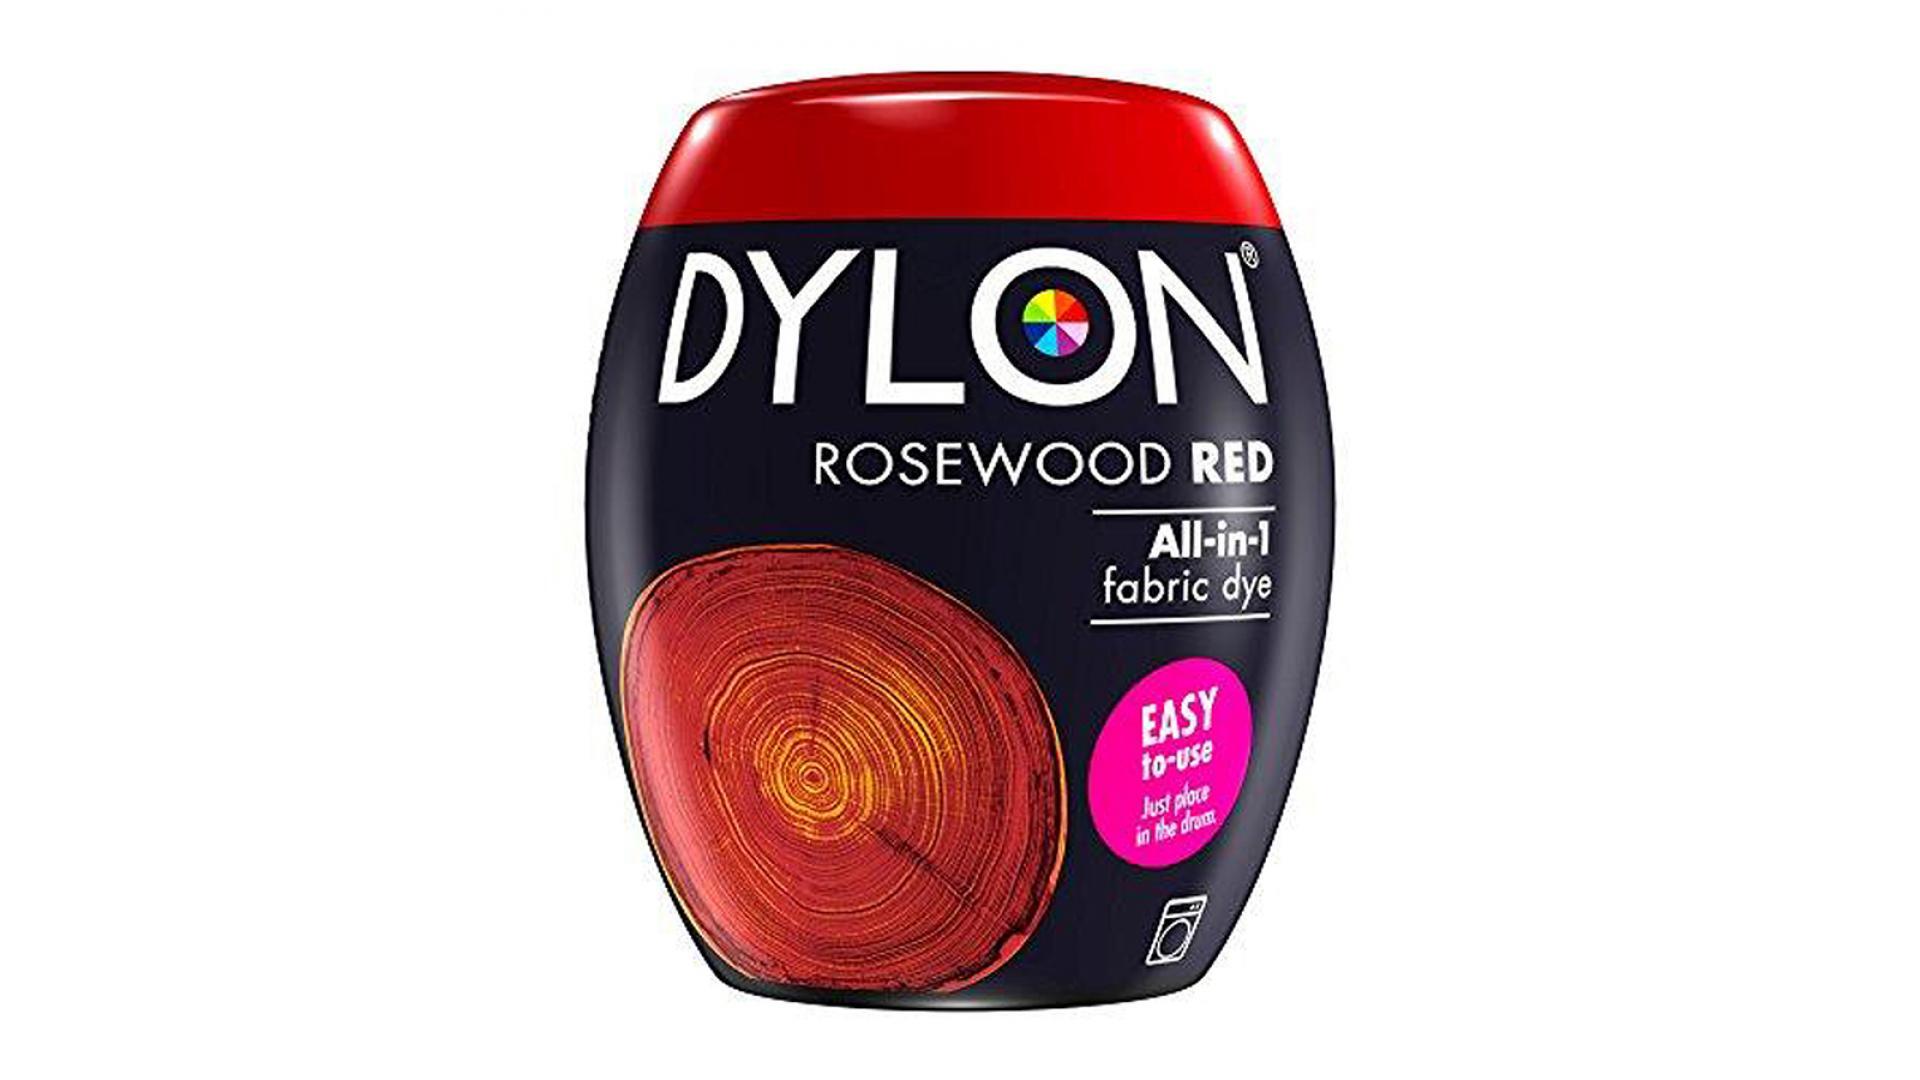  Dylon Fabric Dye, 50 g (Pack of 1), Tulip Red